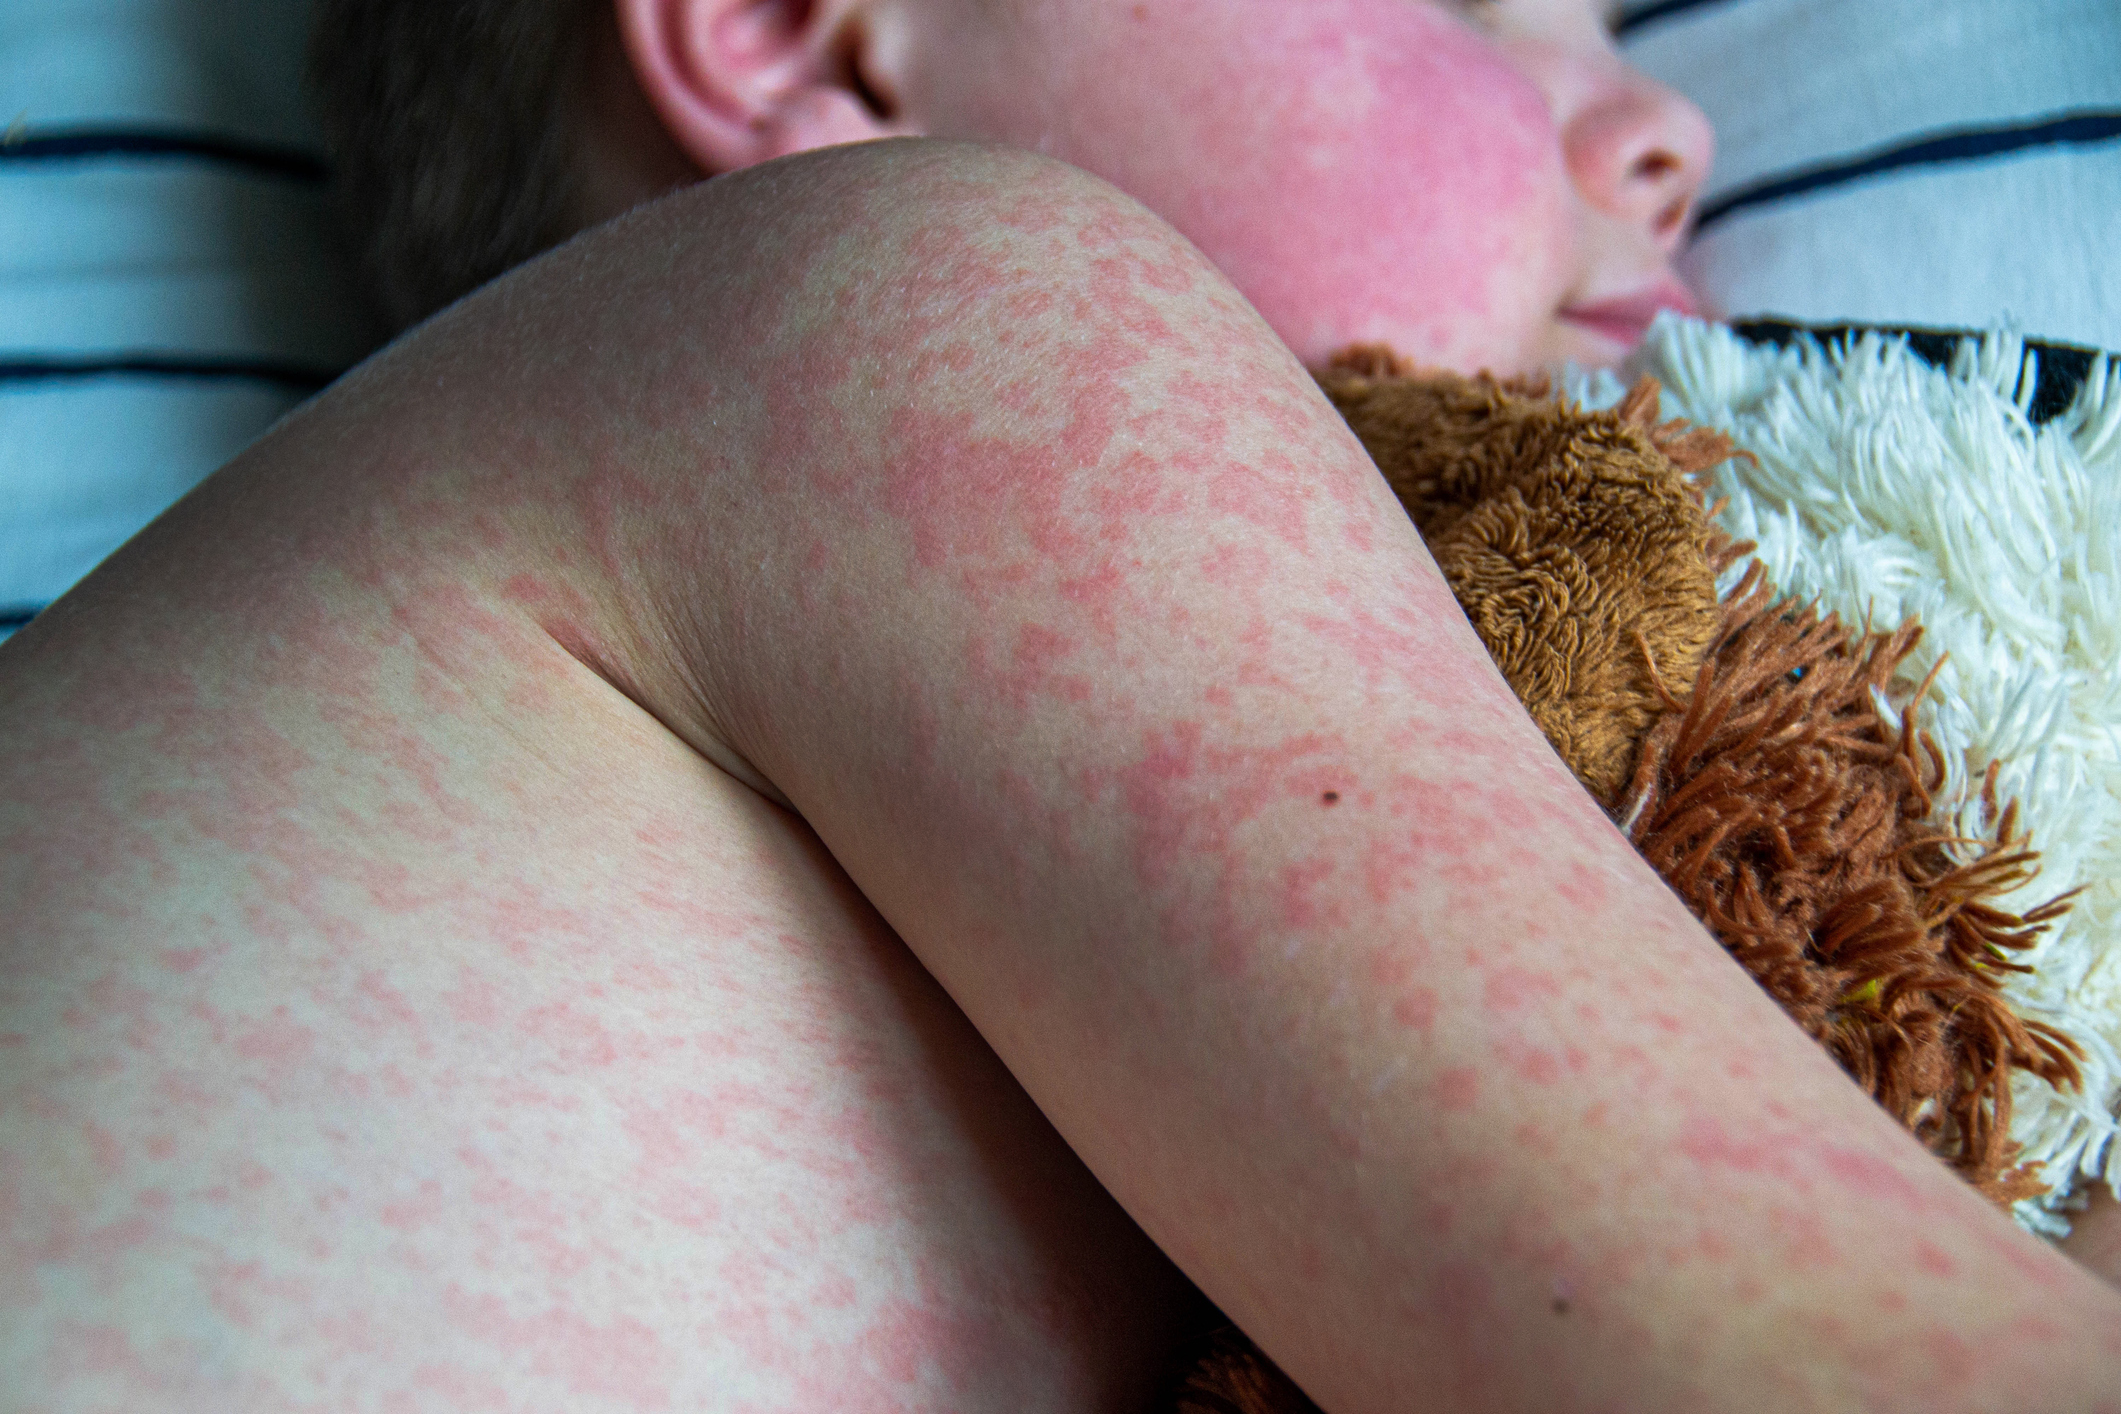 small child with measles rash